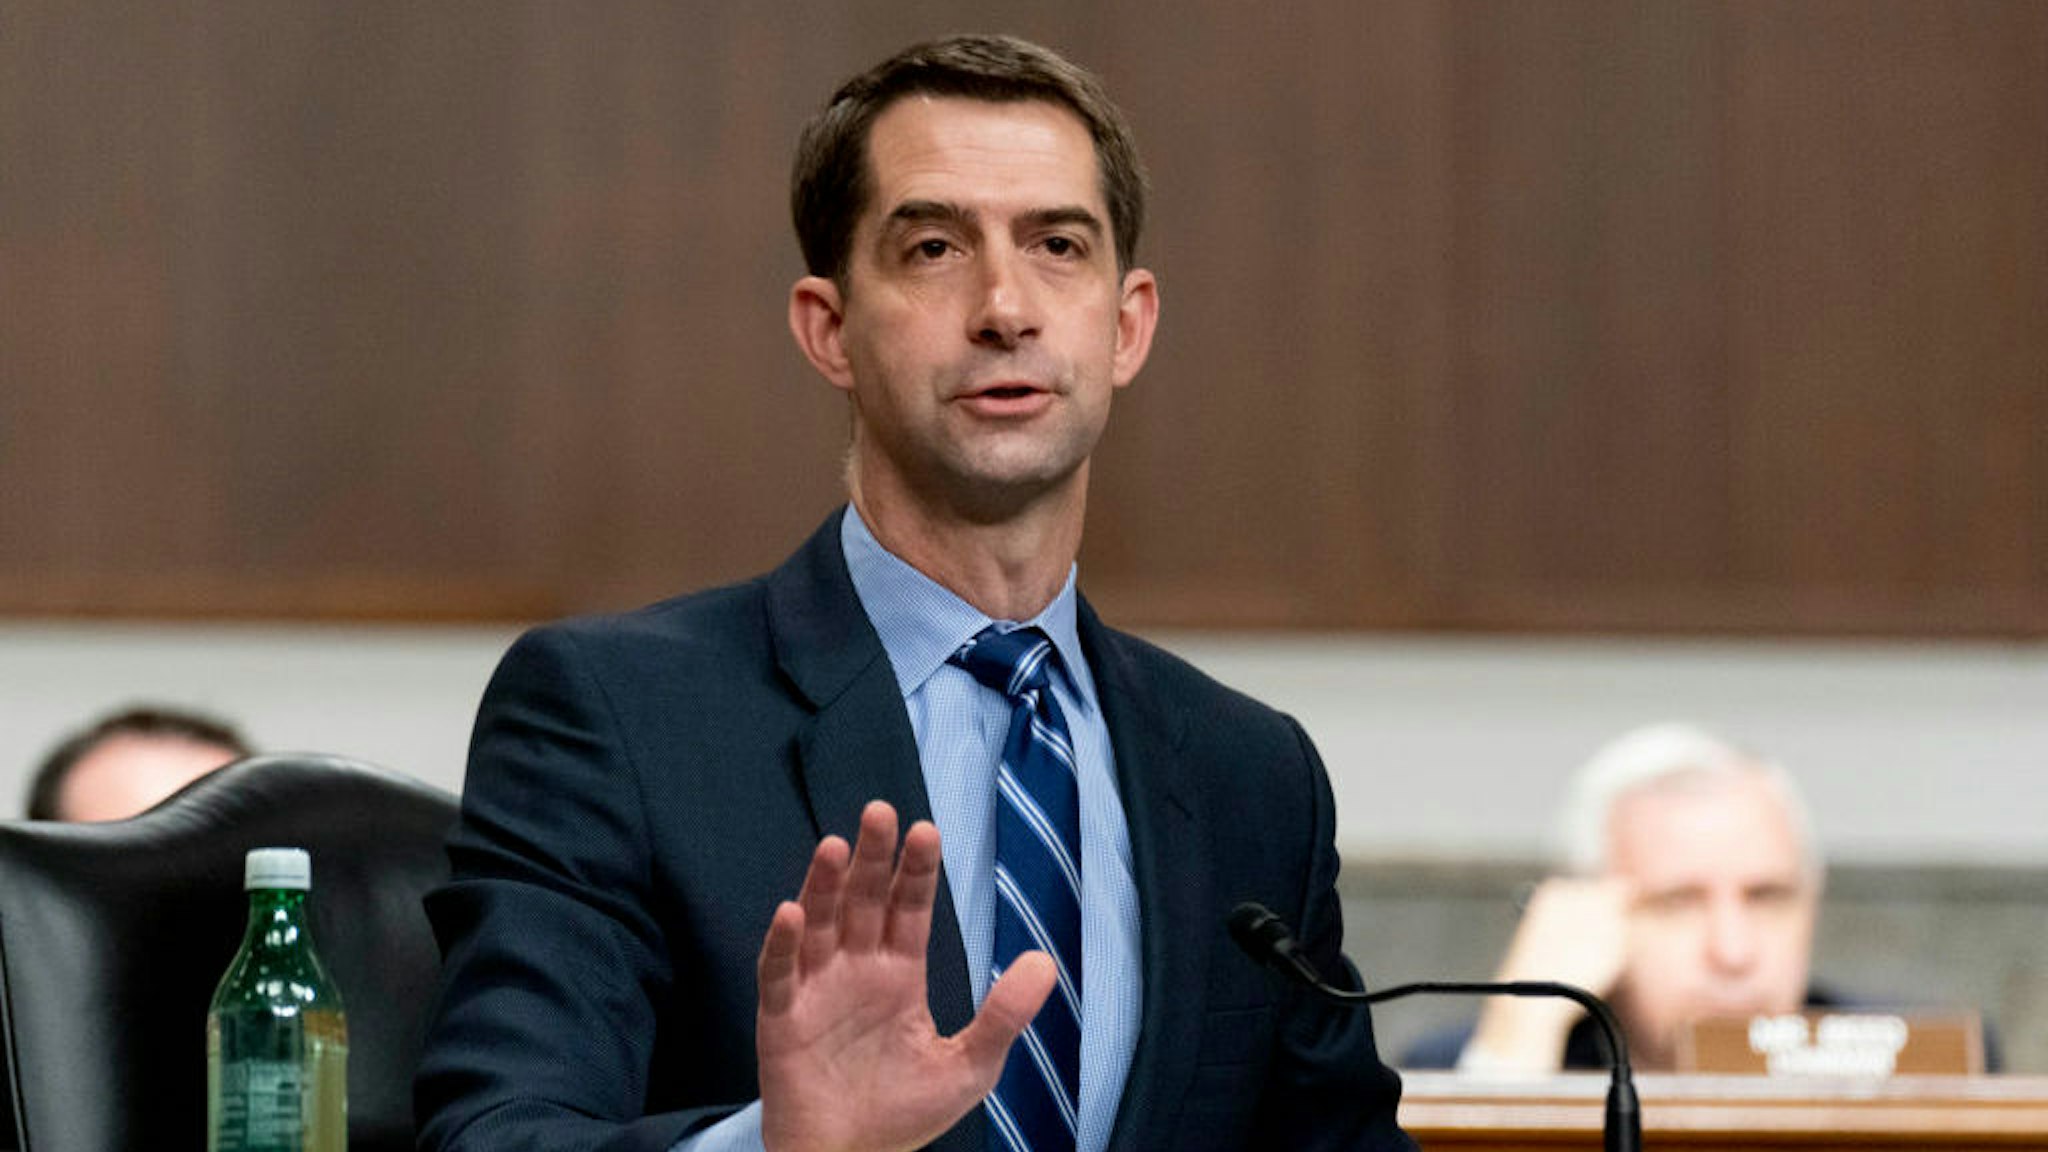 Sen. Tom Cotton, R-Ark., speaks during a hearing to examine United States Special Operations Command and United States Cyber Command in review of the Defense Authorization Request for fiscal year 2022 and the Future Years Defense Program, on Capitol Hill, Thursday, March 25, 2021, in Washington. (AP Photo/Andrew Harnik, Pool)